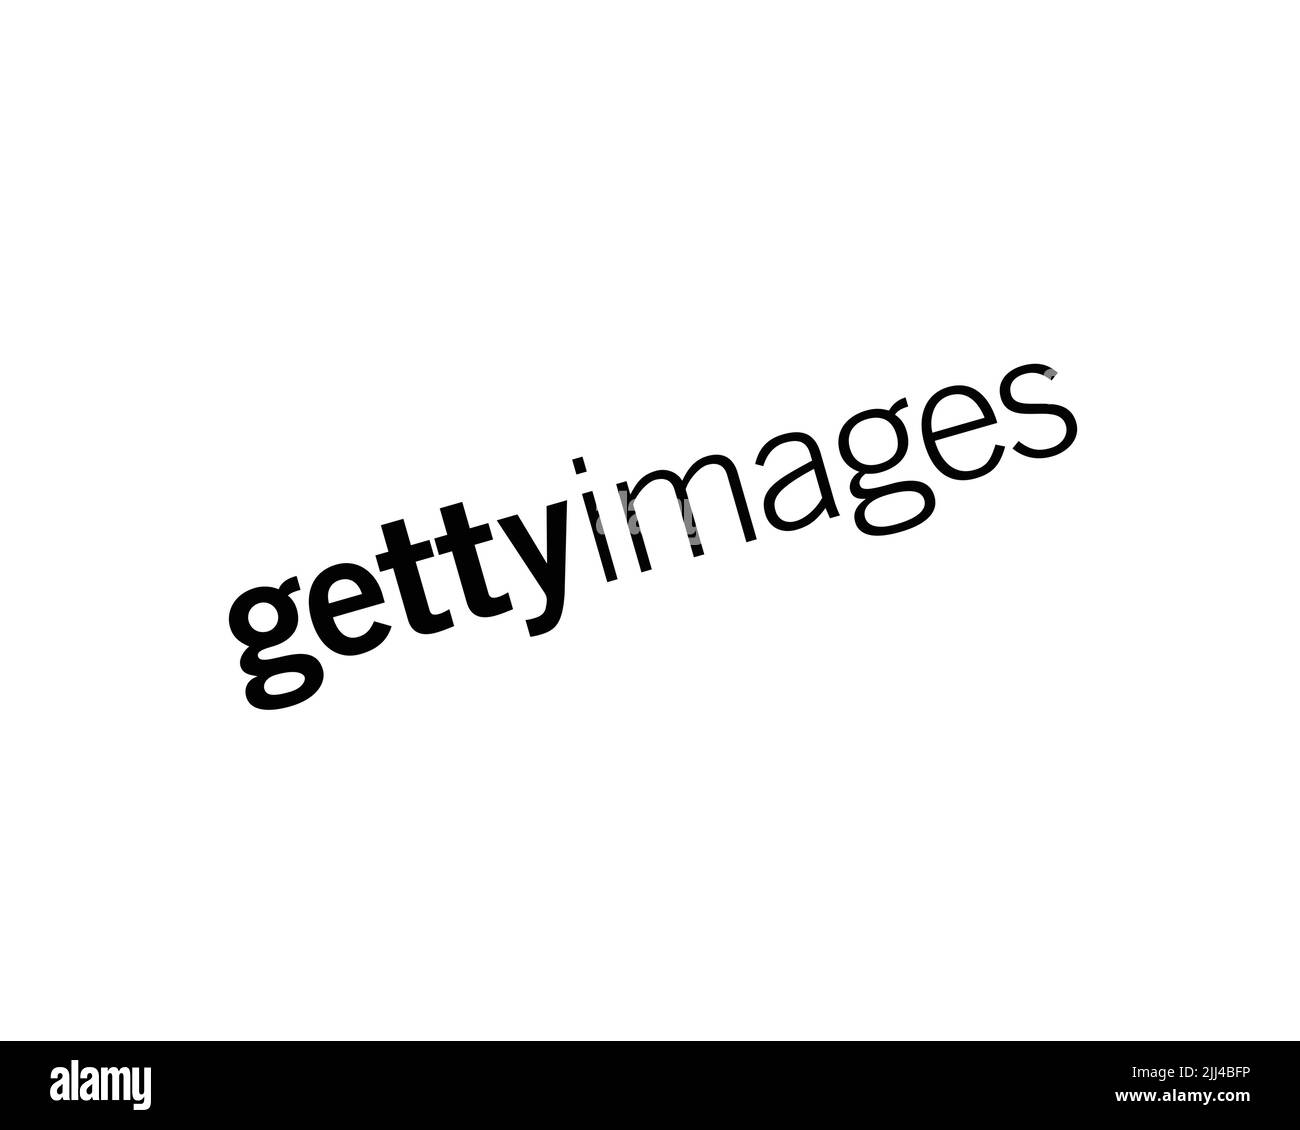 Getty Images Newsroom - Getty Images